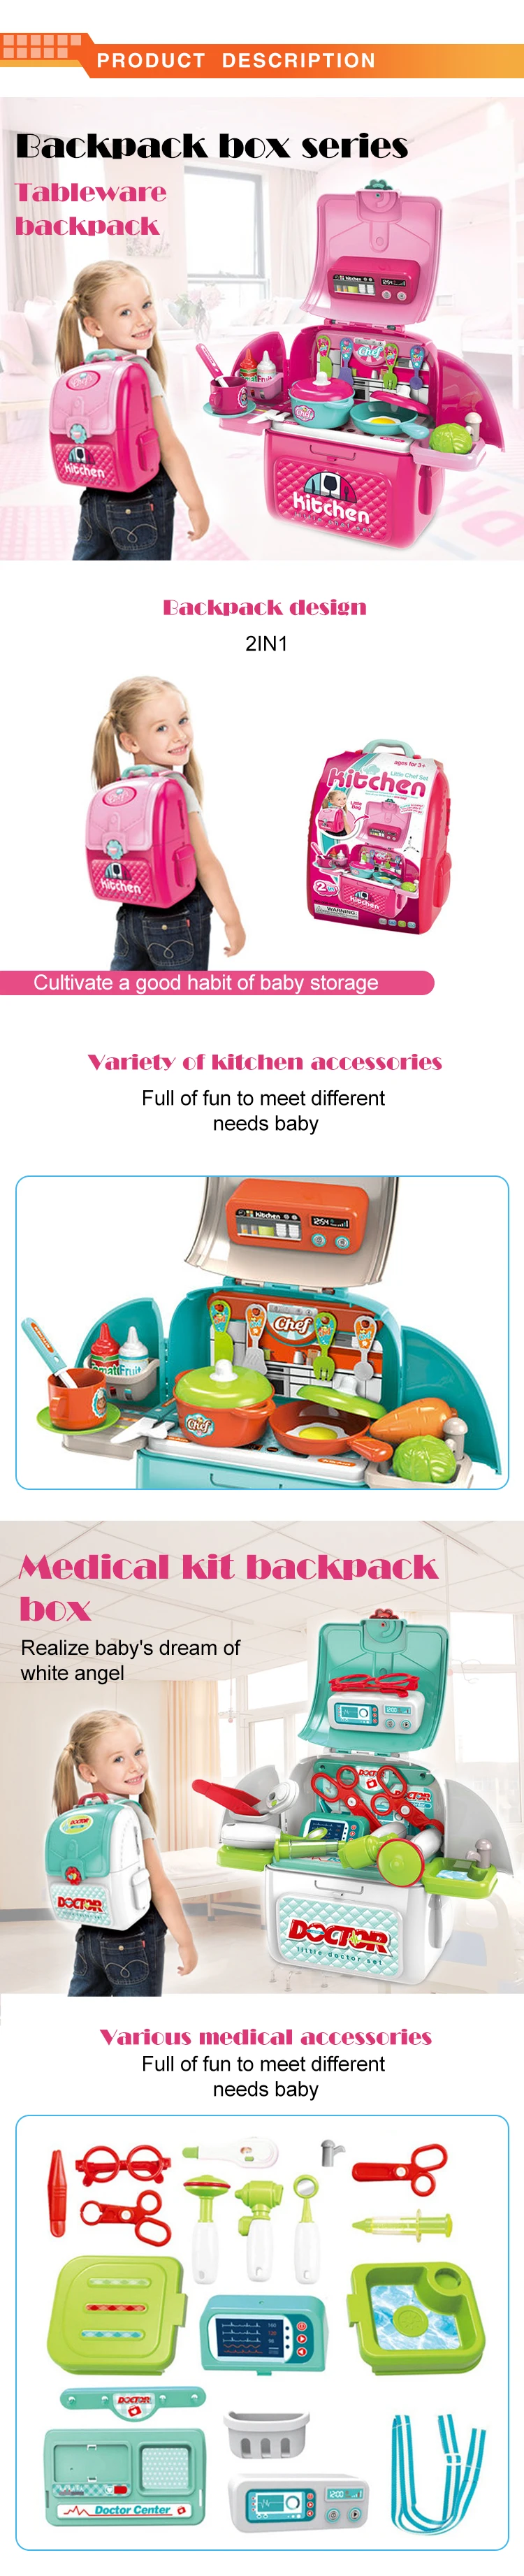 Boys and girls educationaly toys multifunction kitchen tool tableware Medical kit backpack box pretend play